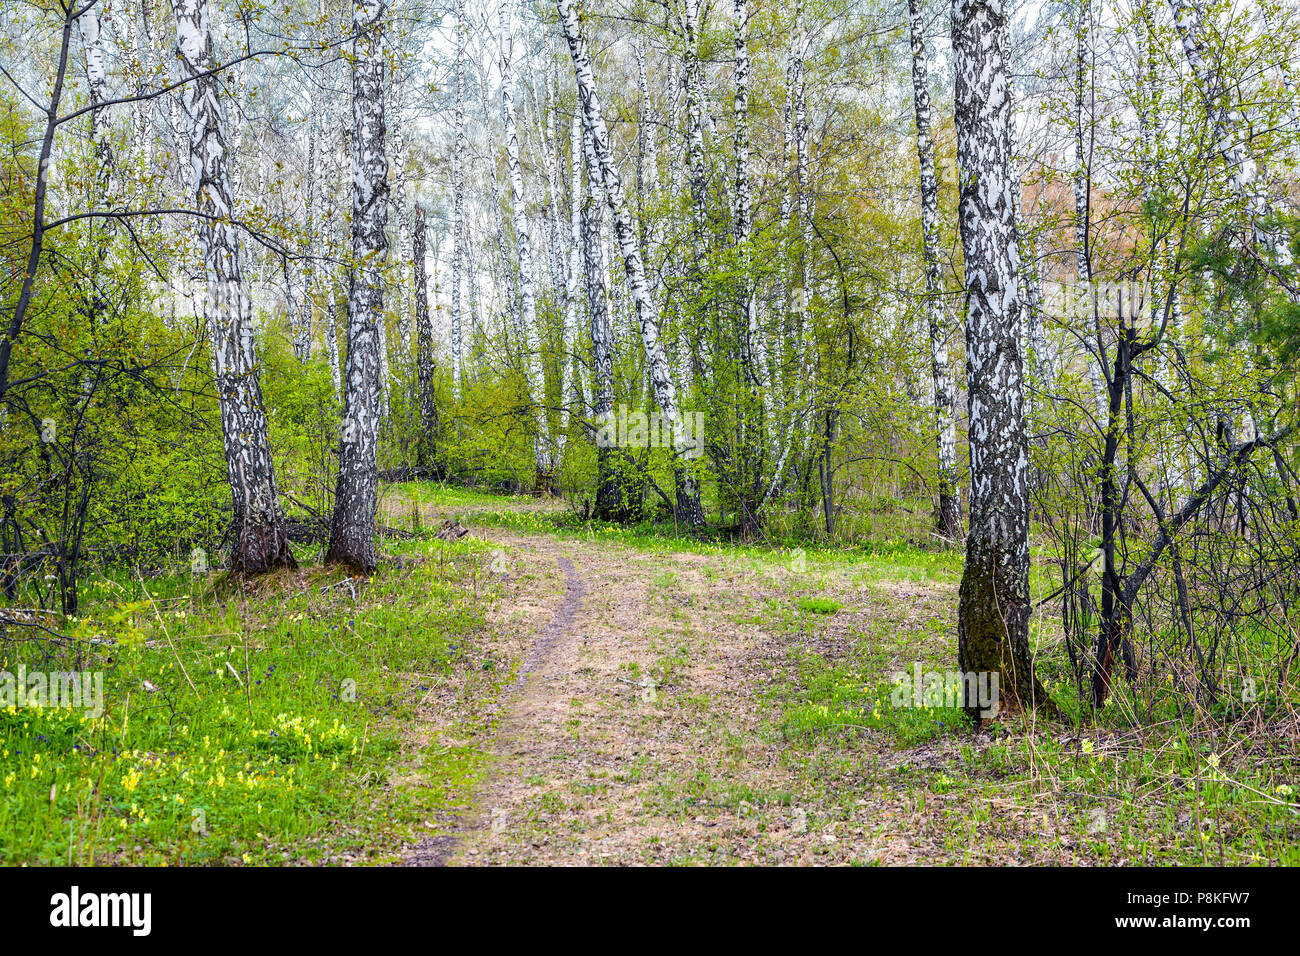 Sunny spring day in a birch grove. Stock Photo